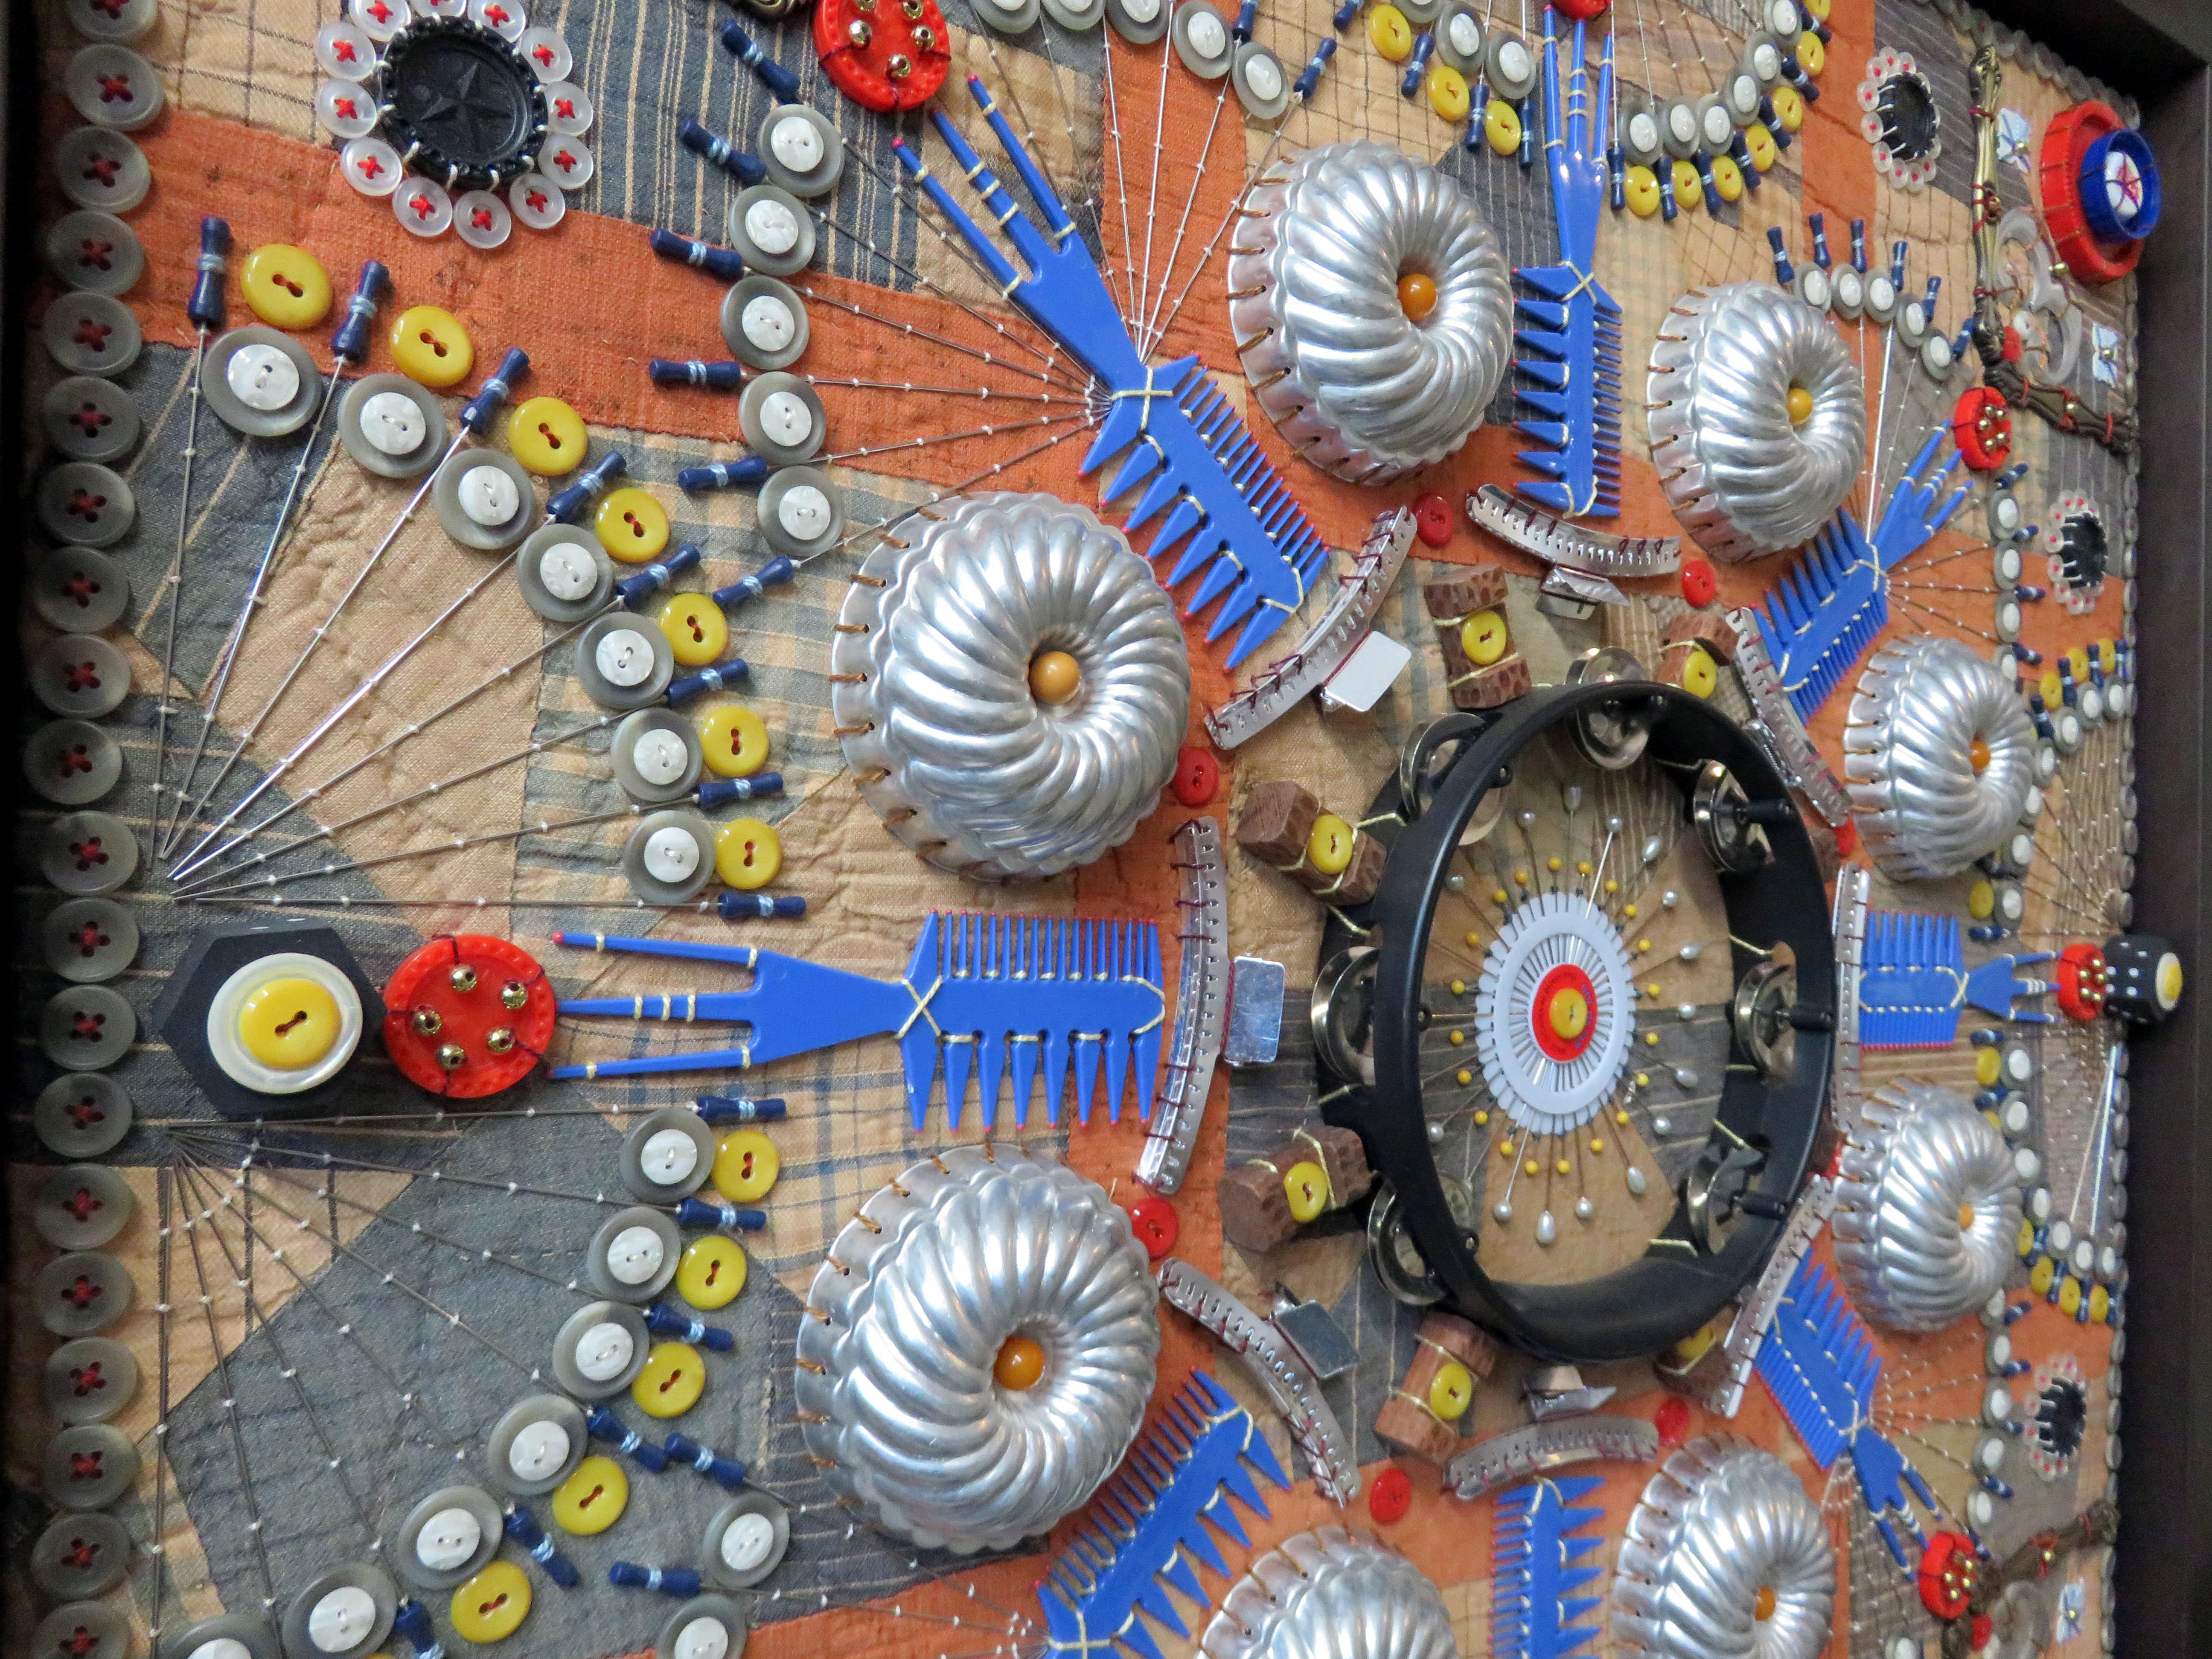 This work features hues of orange, yellow, blue and red.

Columbia, South Carolina-based artist, Susan Lenz uses needle and thread for self-expression. Her ongoing series Found Object Mandalas speaks to the universal desire for a place of belonging